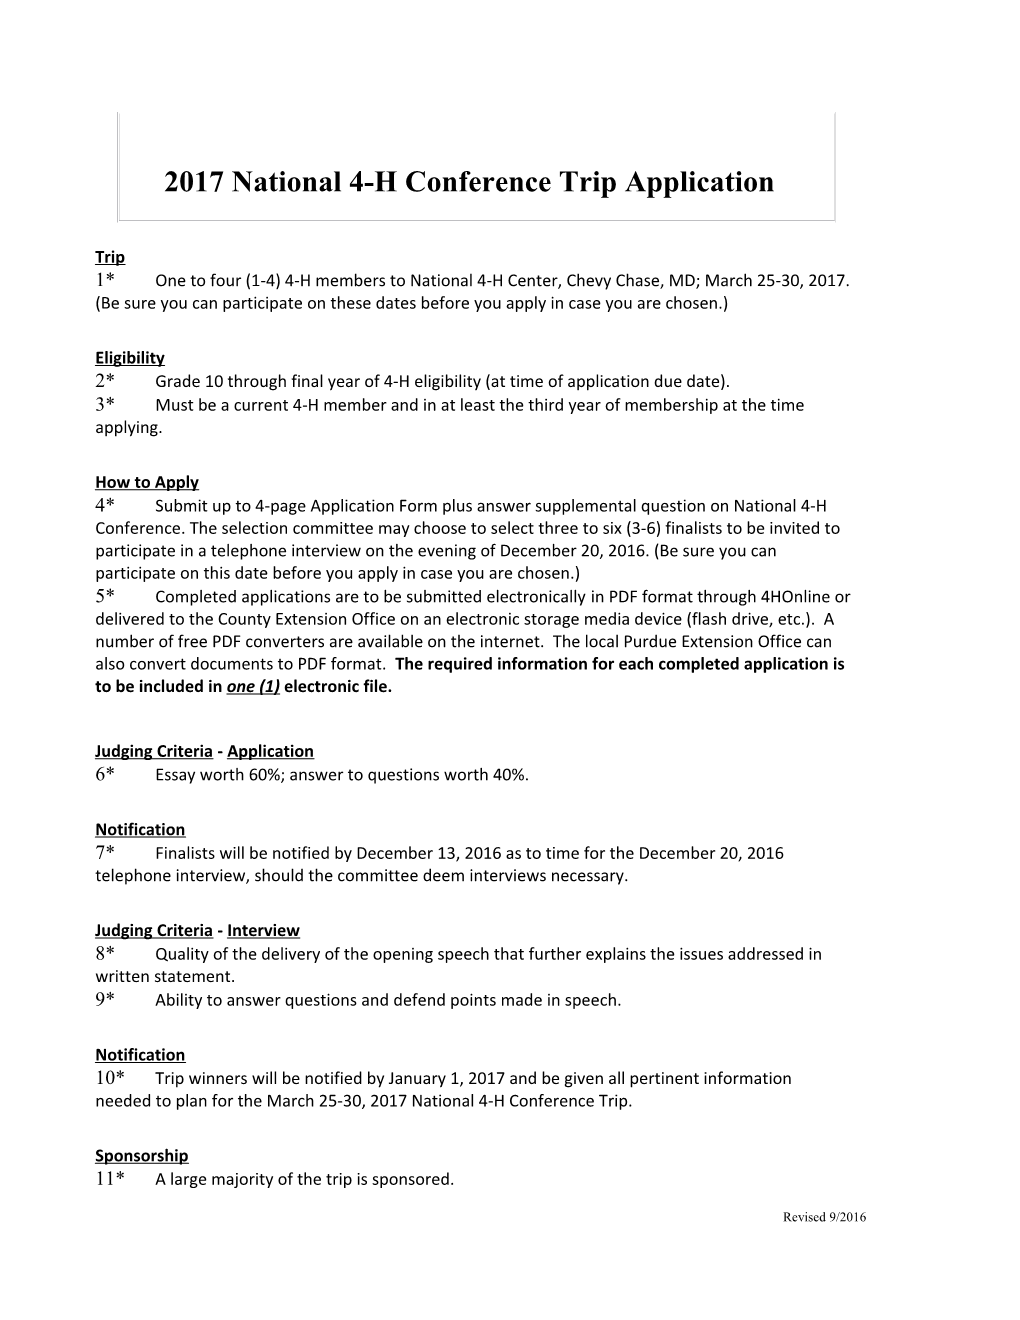 2017National 4-H Conference Trip Application